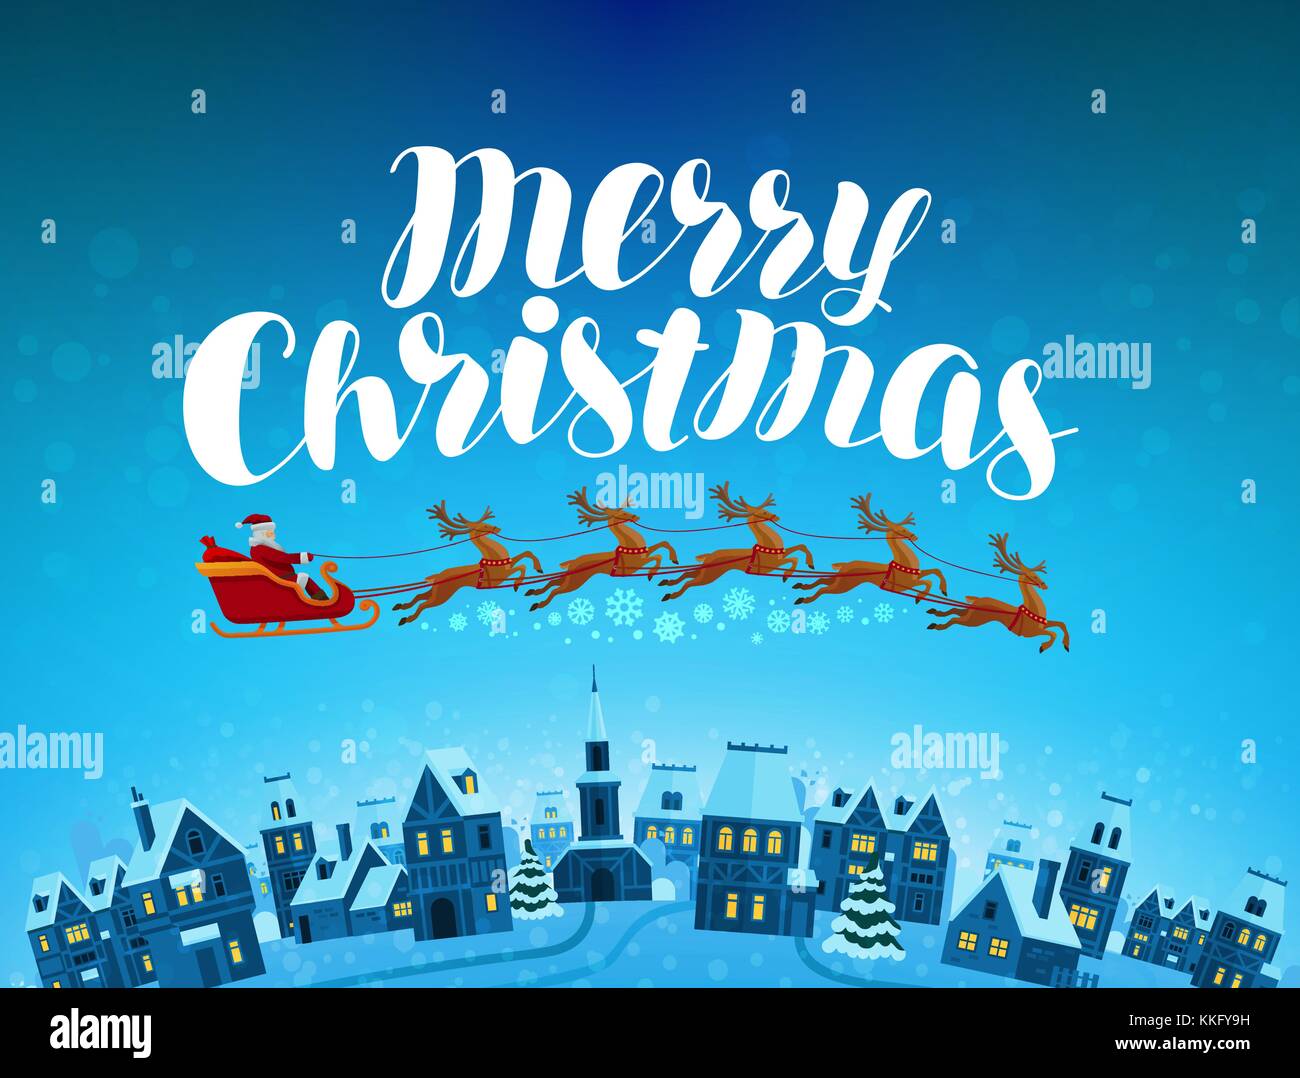 Merry Christmas, greeting card. Santa Claus rides in sleigh at night over town. Cartoon vector illustration Stock Vector